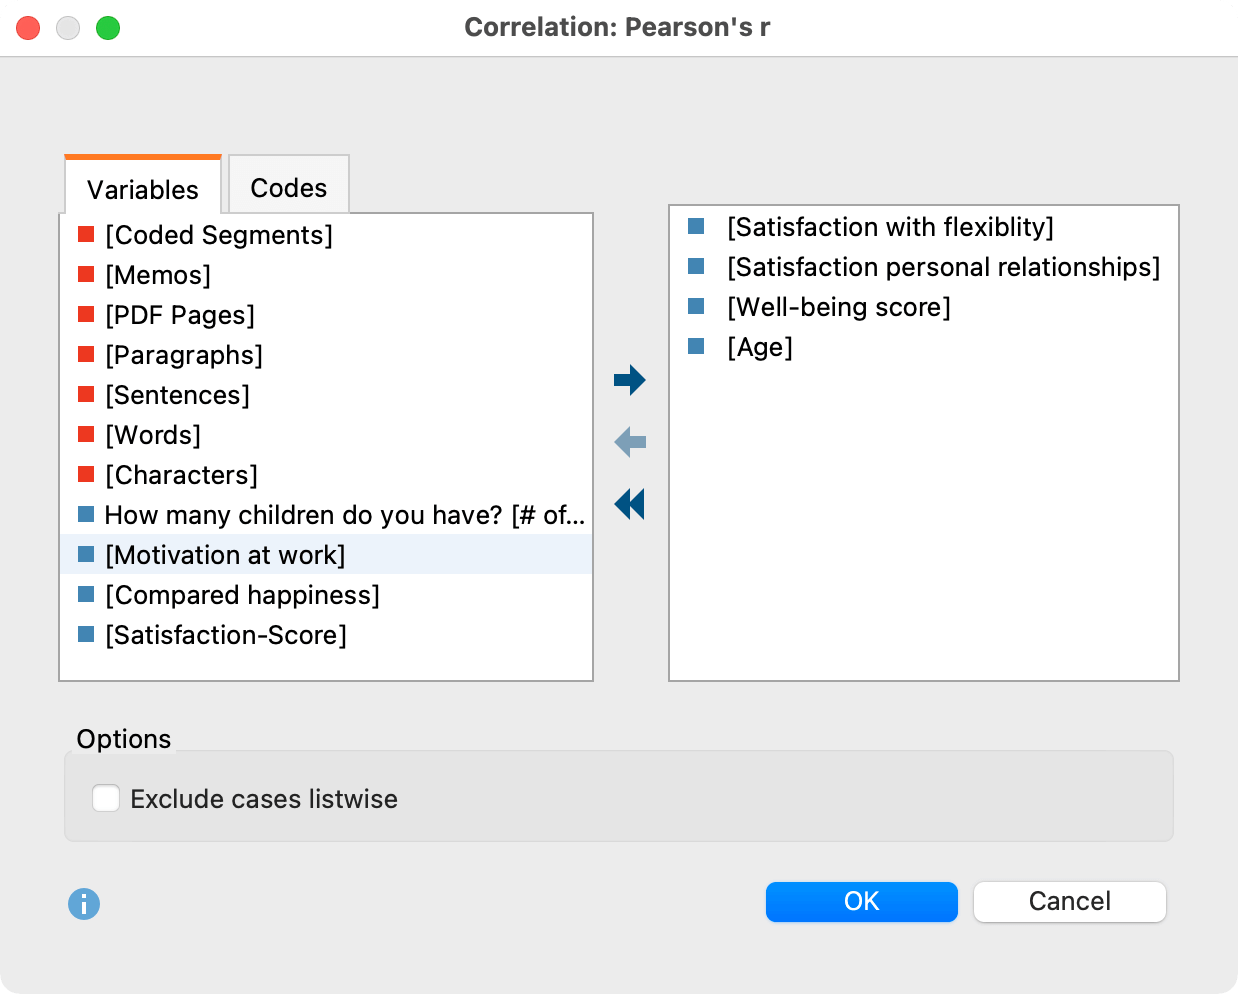 Dialog box for selecting variables to calculate correlation (pictured here: Pearson’s r)